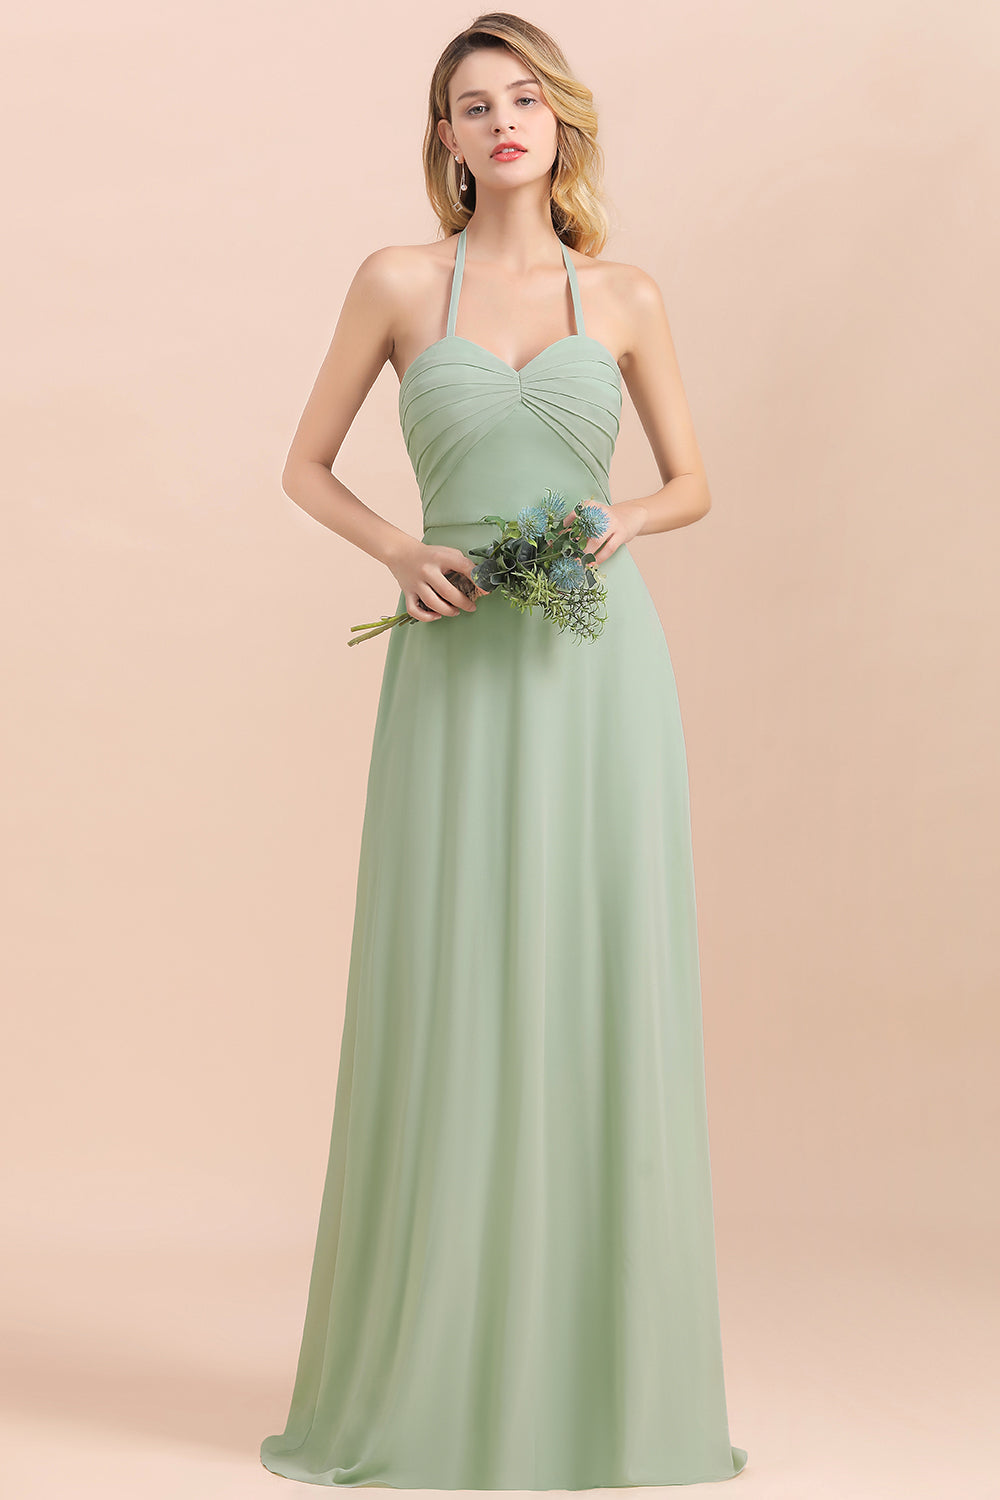 Load image into Gallery viewer, A-Line Halter Sweetheart Chiffon Sage Bridesmaid Dress Chic Long Wedding Guest Dress-BIZTUNNEL
